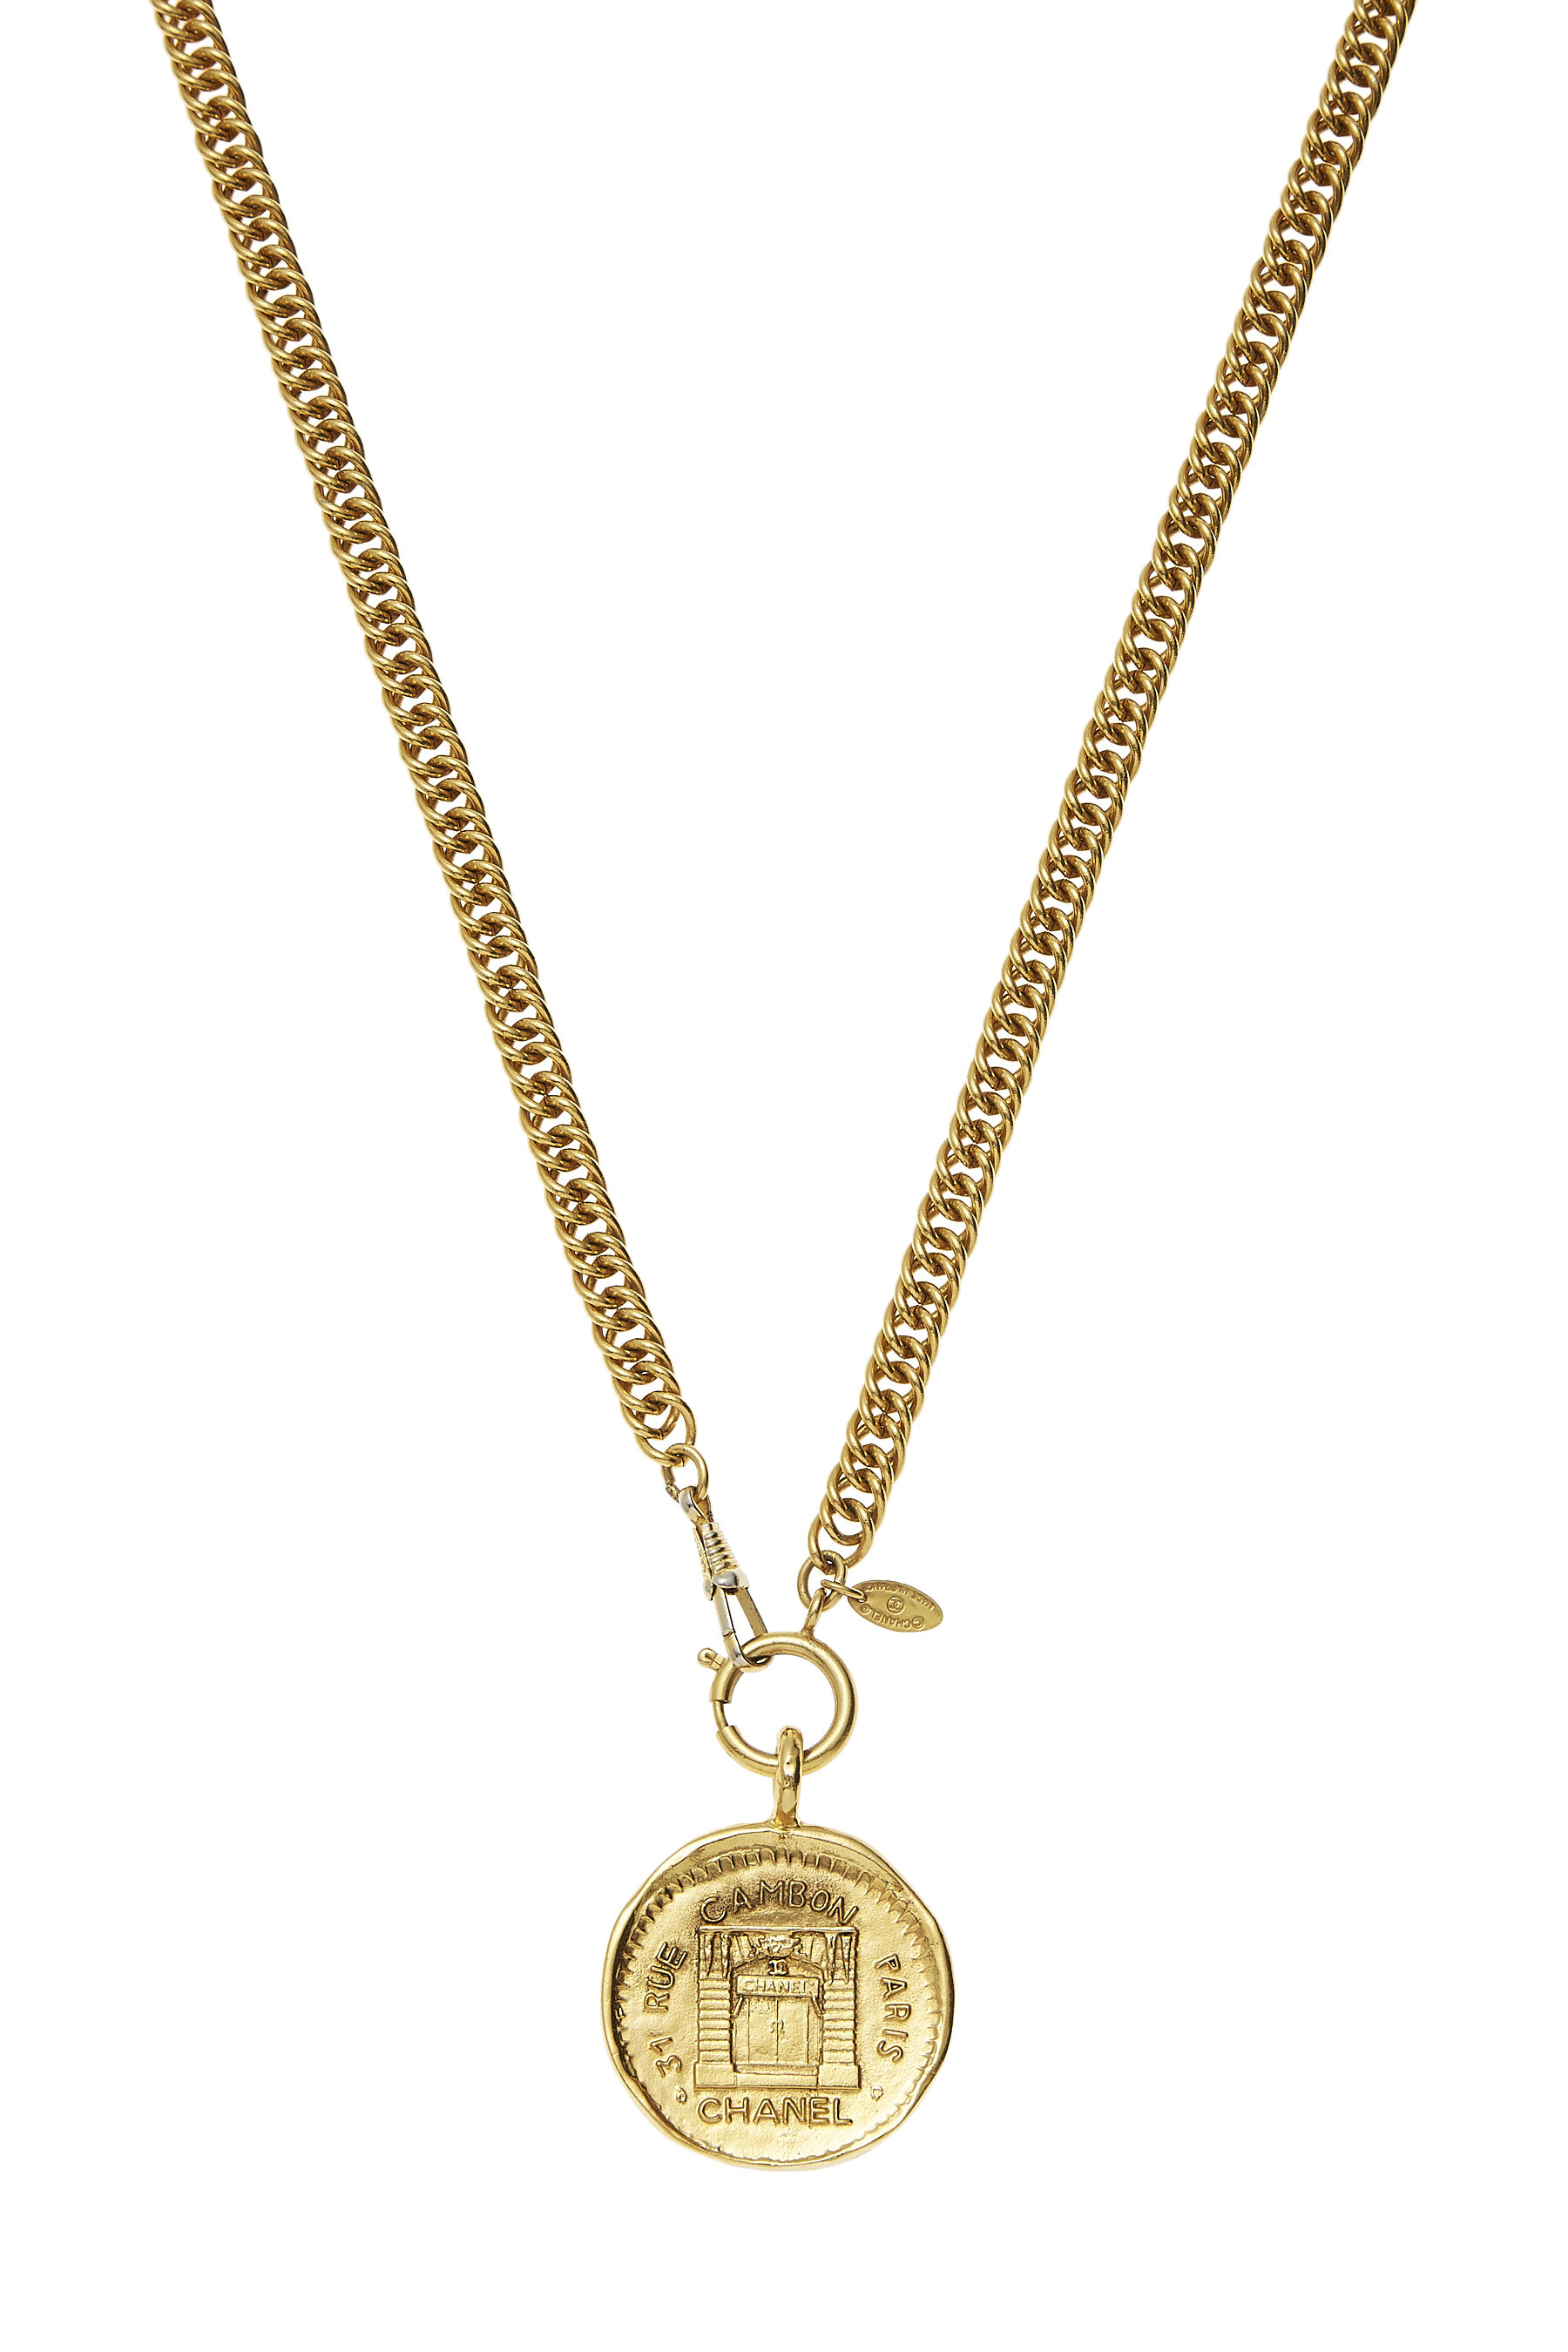 Chanel Long Pendant Necklace ABA680 B10898 NN562, Gold, One Size